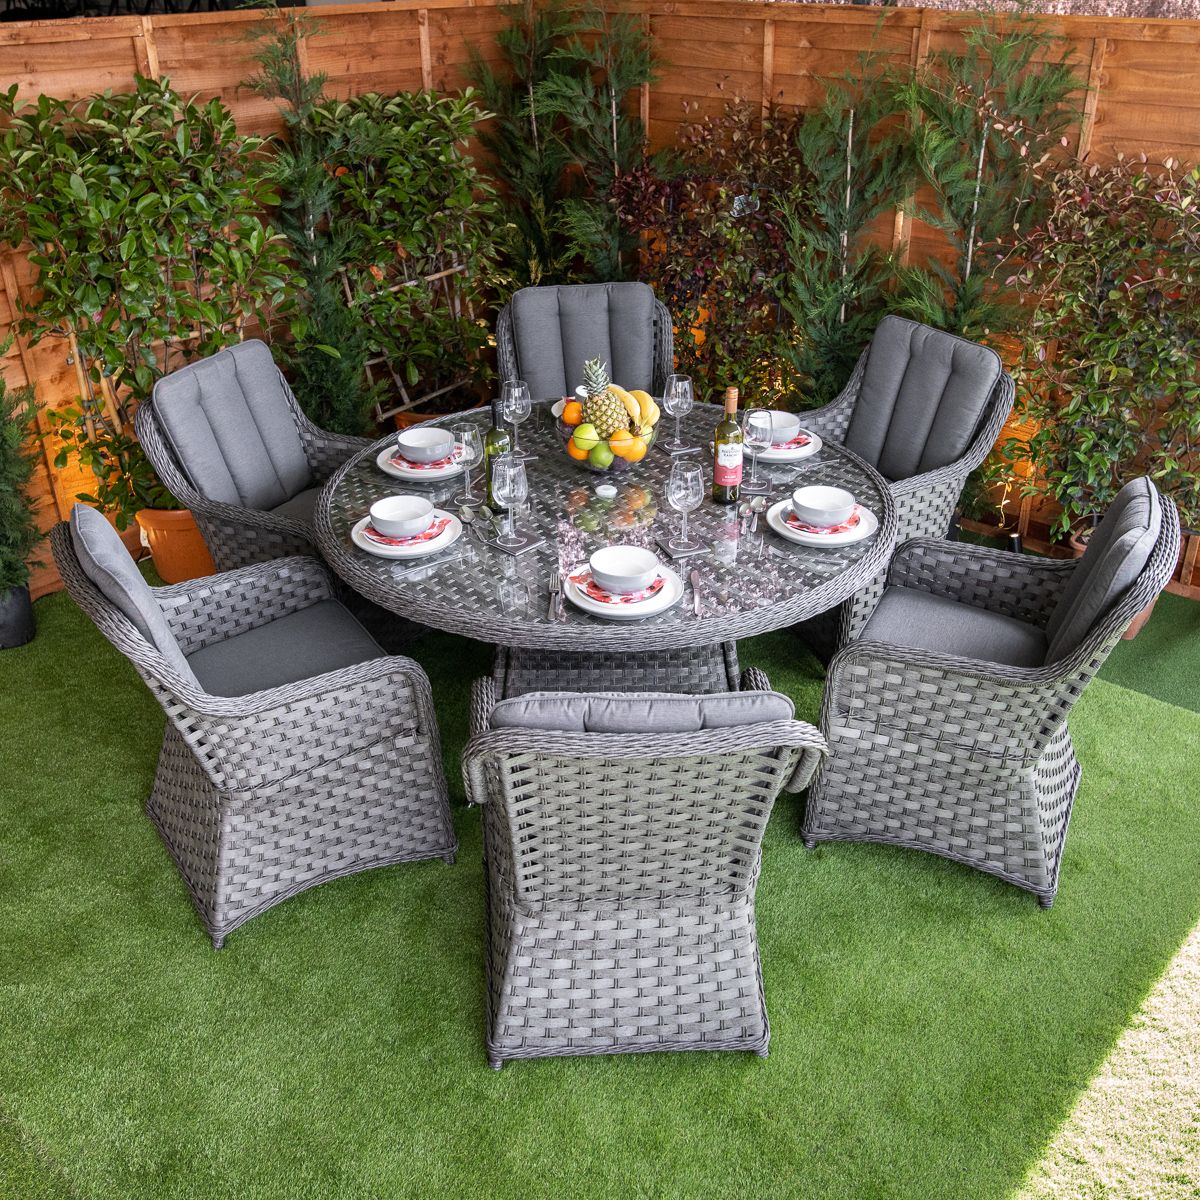 Spend More Time Outdoors: Discover the Most Weather-Resistant Garden Furniture